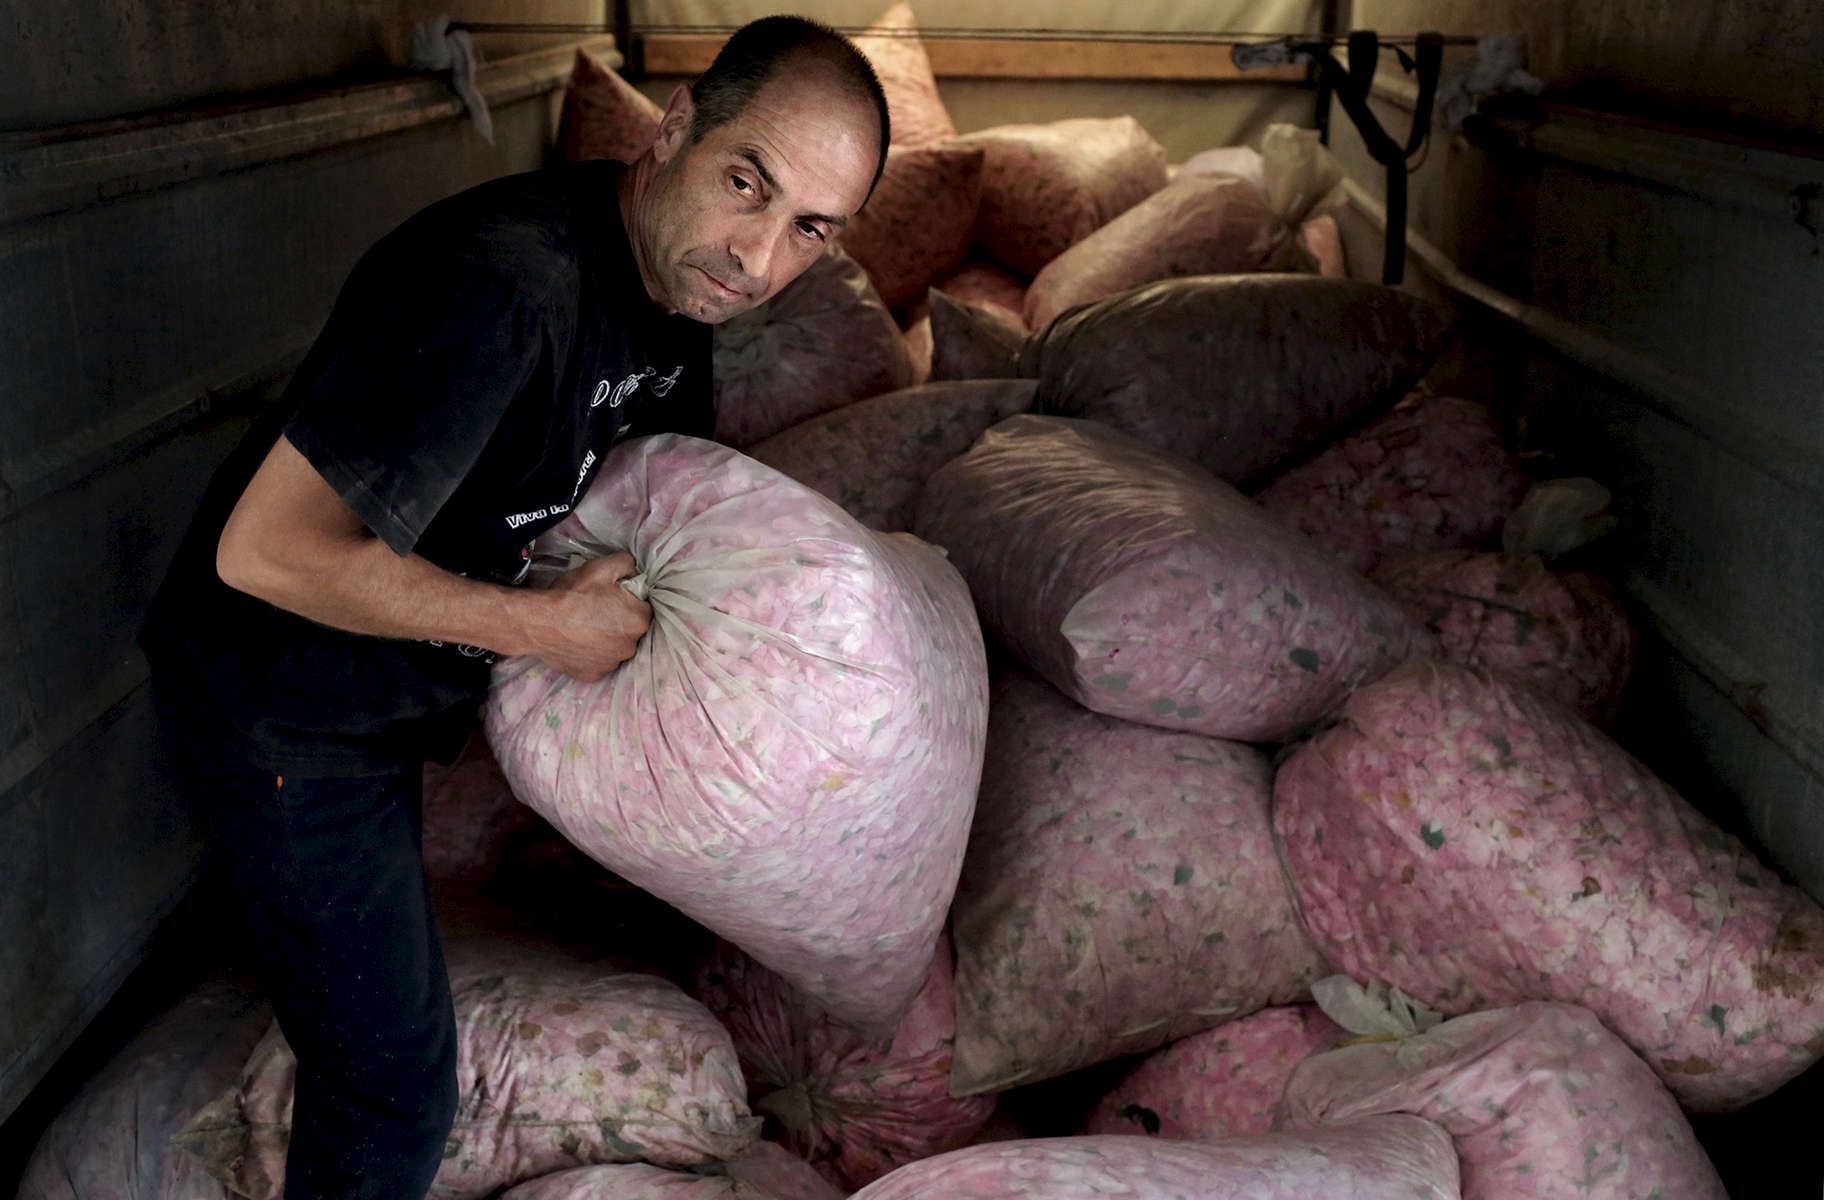 Stanimir Alexandrov, 54, delivers bags of roses to Lema distillery in Kazanlak, Bulgaria on May 24, 2018. Each of its caldrons has a 5 ton capacity, and it takes 3 to 5 tonnes of roses to produce just 1 kg of rose oil.Photo by: Yana Paskova for National Geographic Traveler